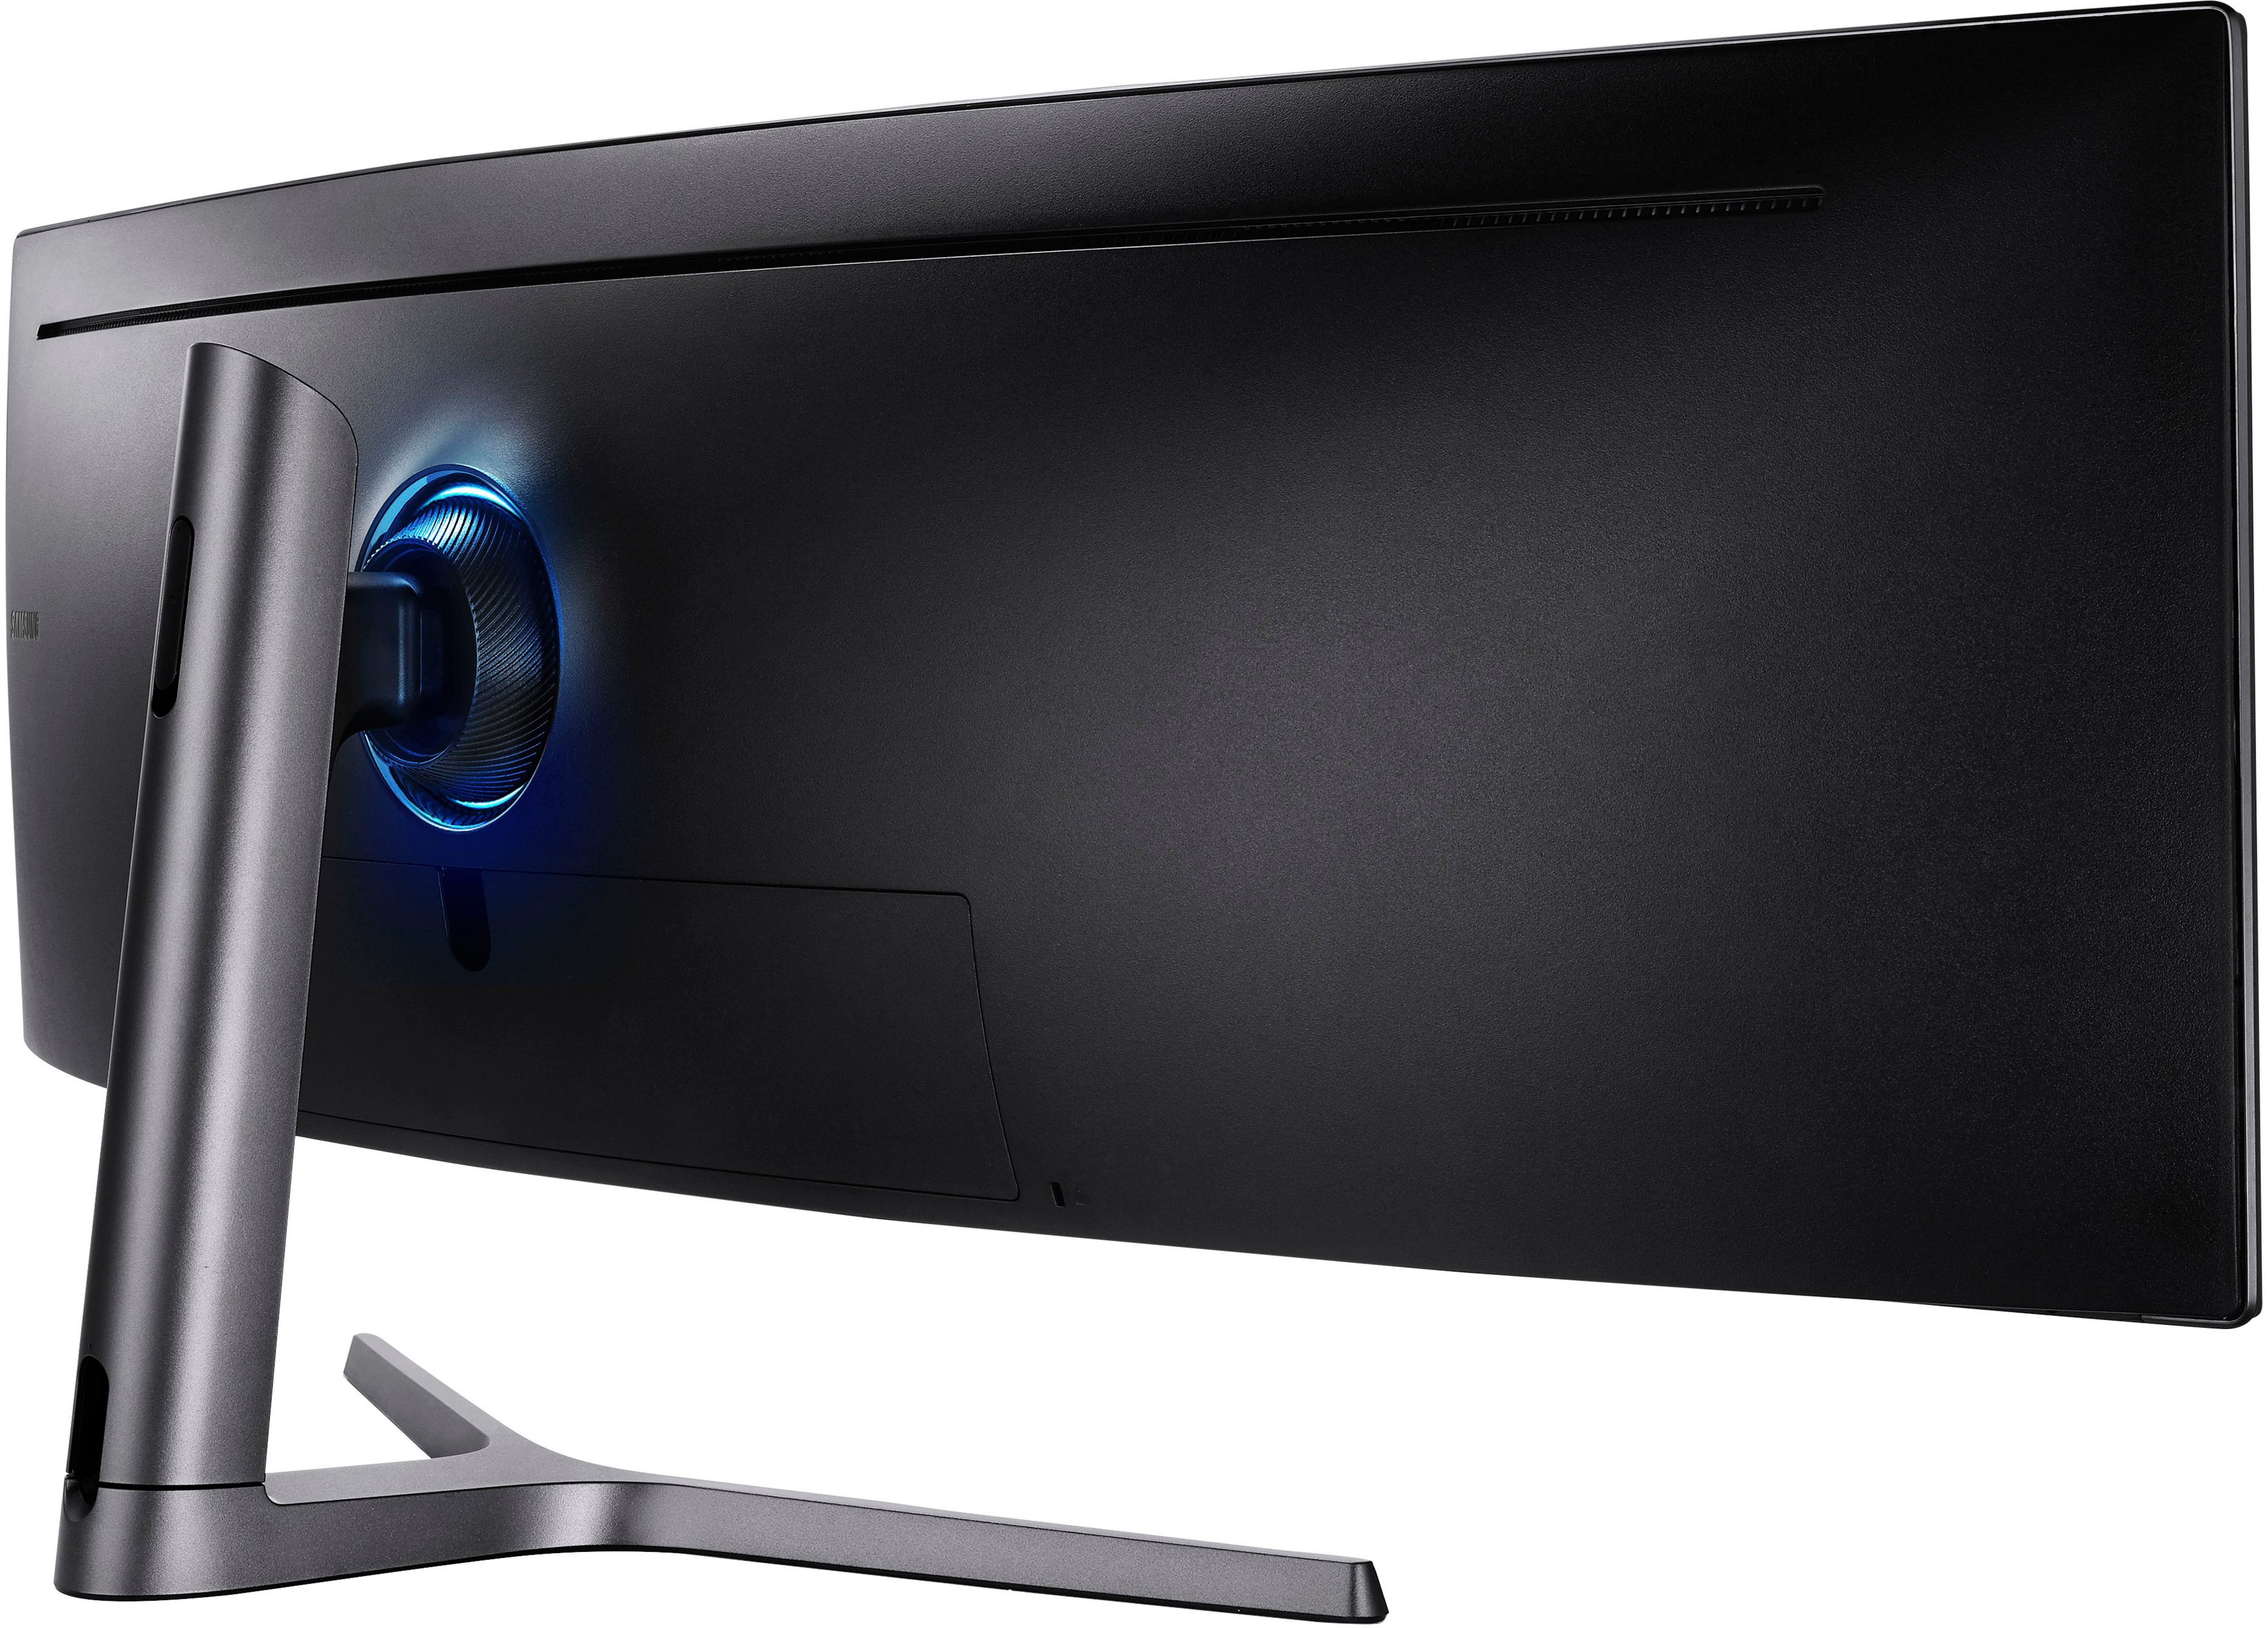 Questions And Answers Samsung Crg Series Odyssey Led Curved Dual Qhd Freesync And G Sync